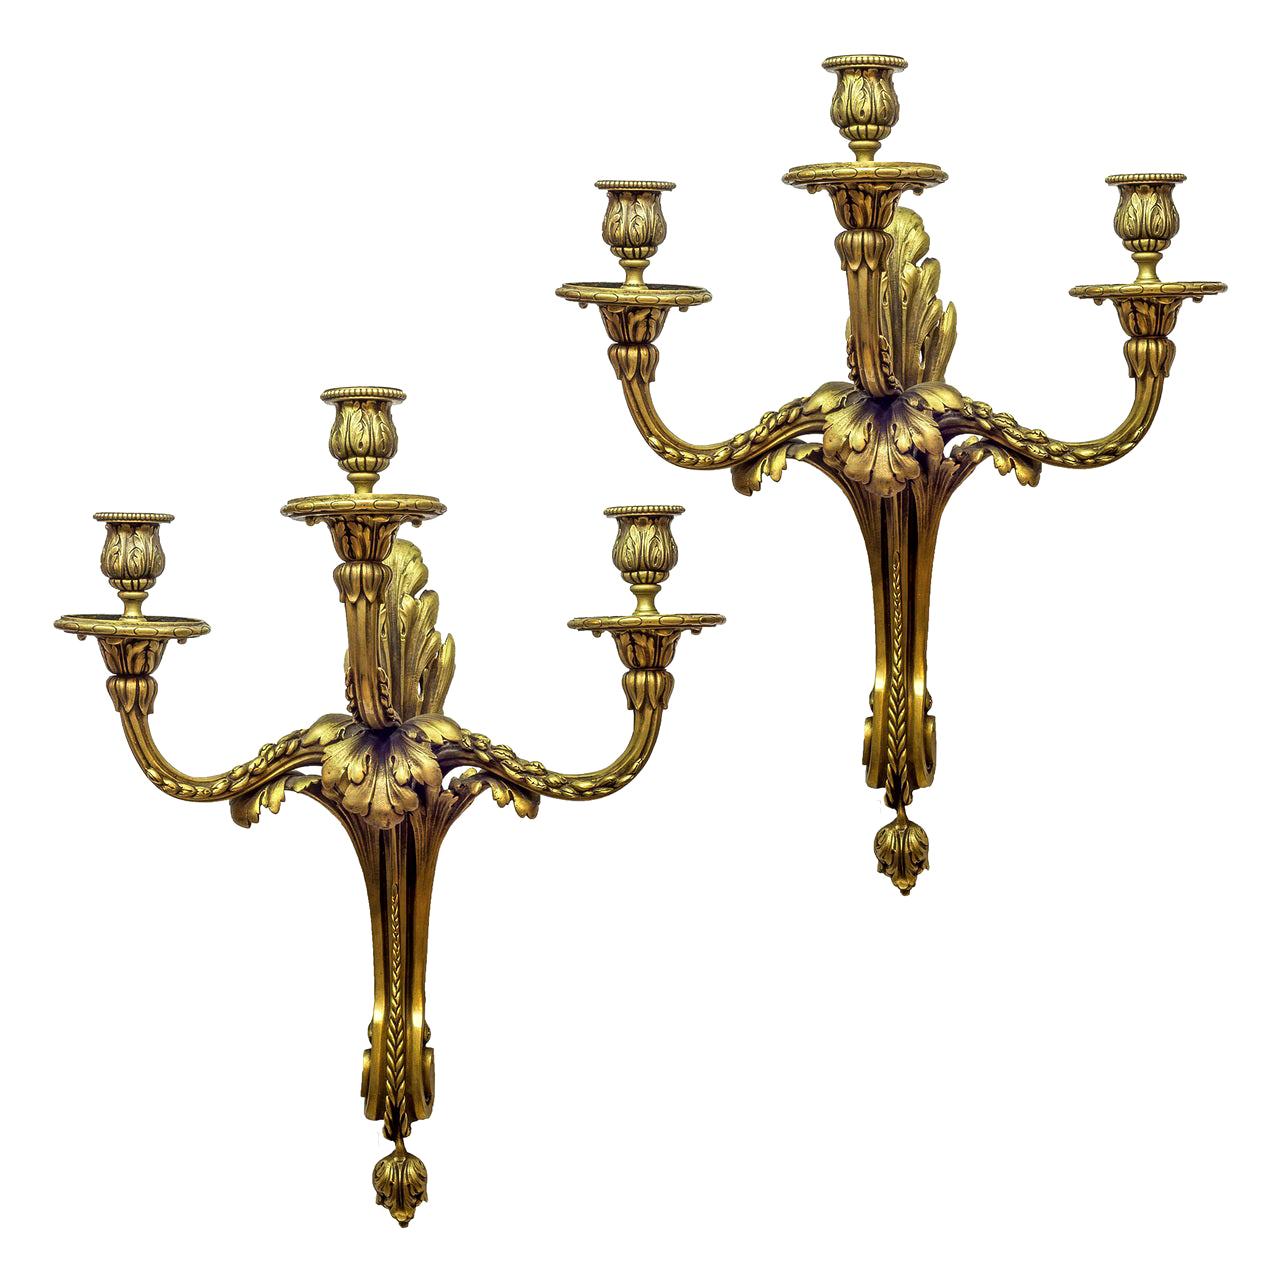 Pair of Caldwell Gilt Bronze Three-Light Wall Light Sconces For Sale